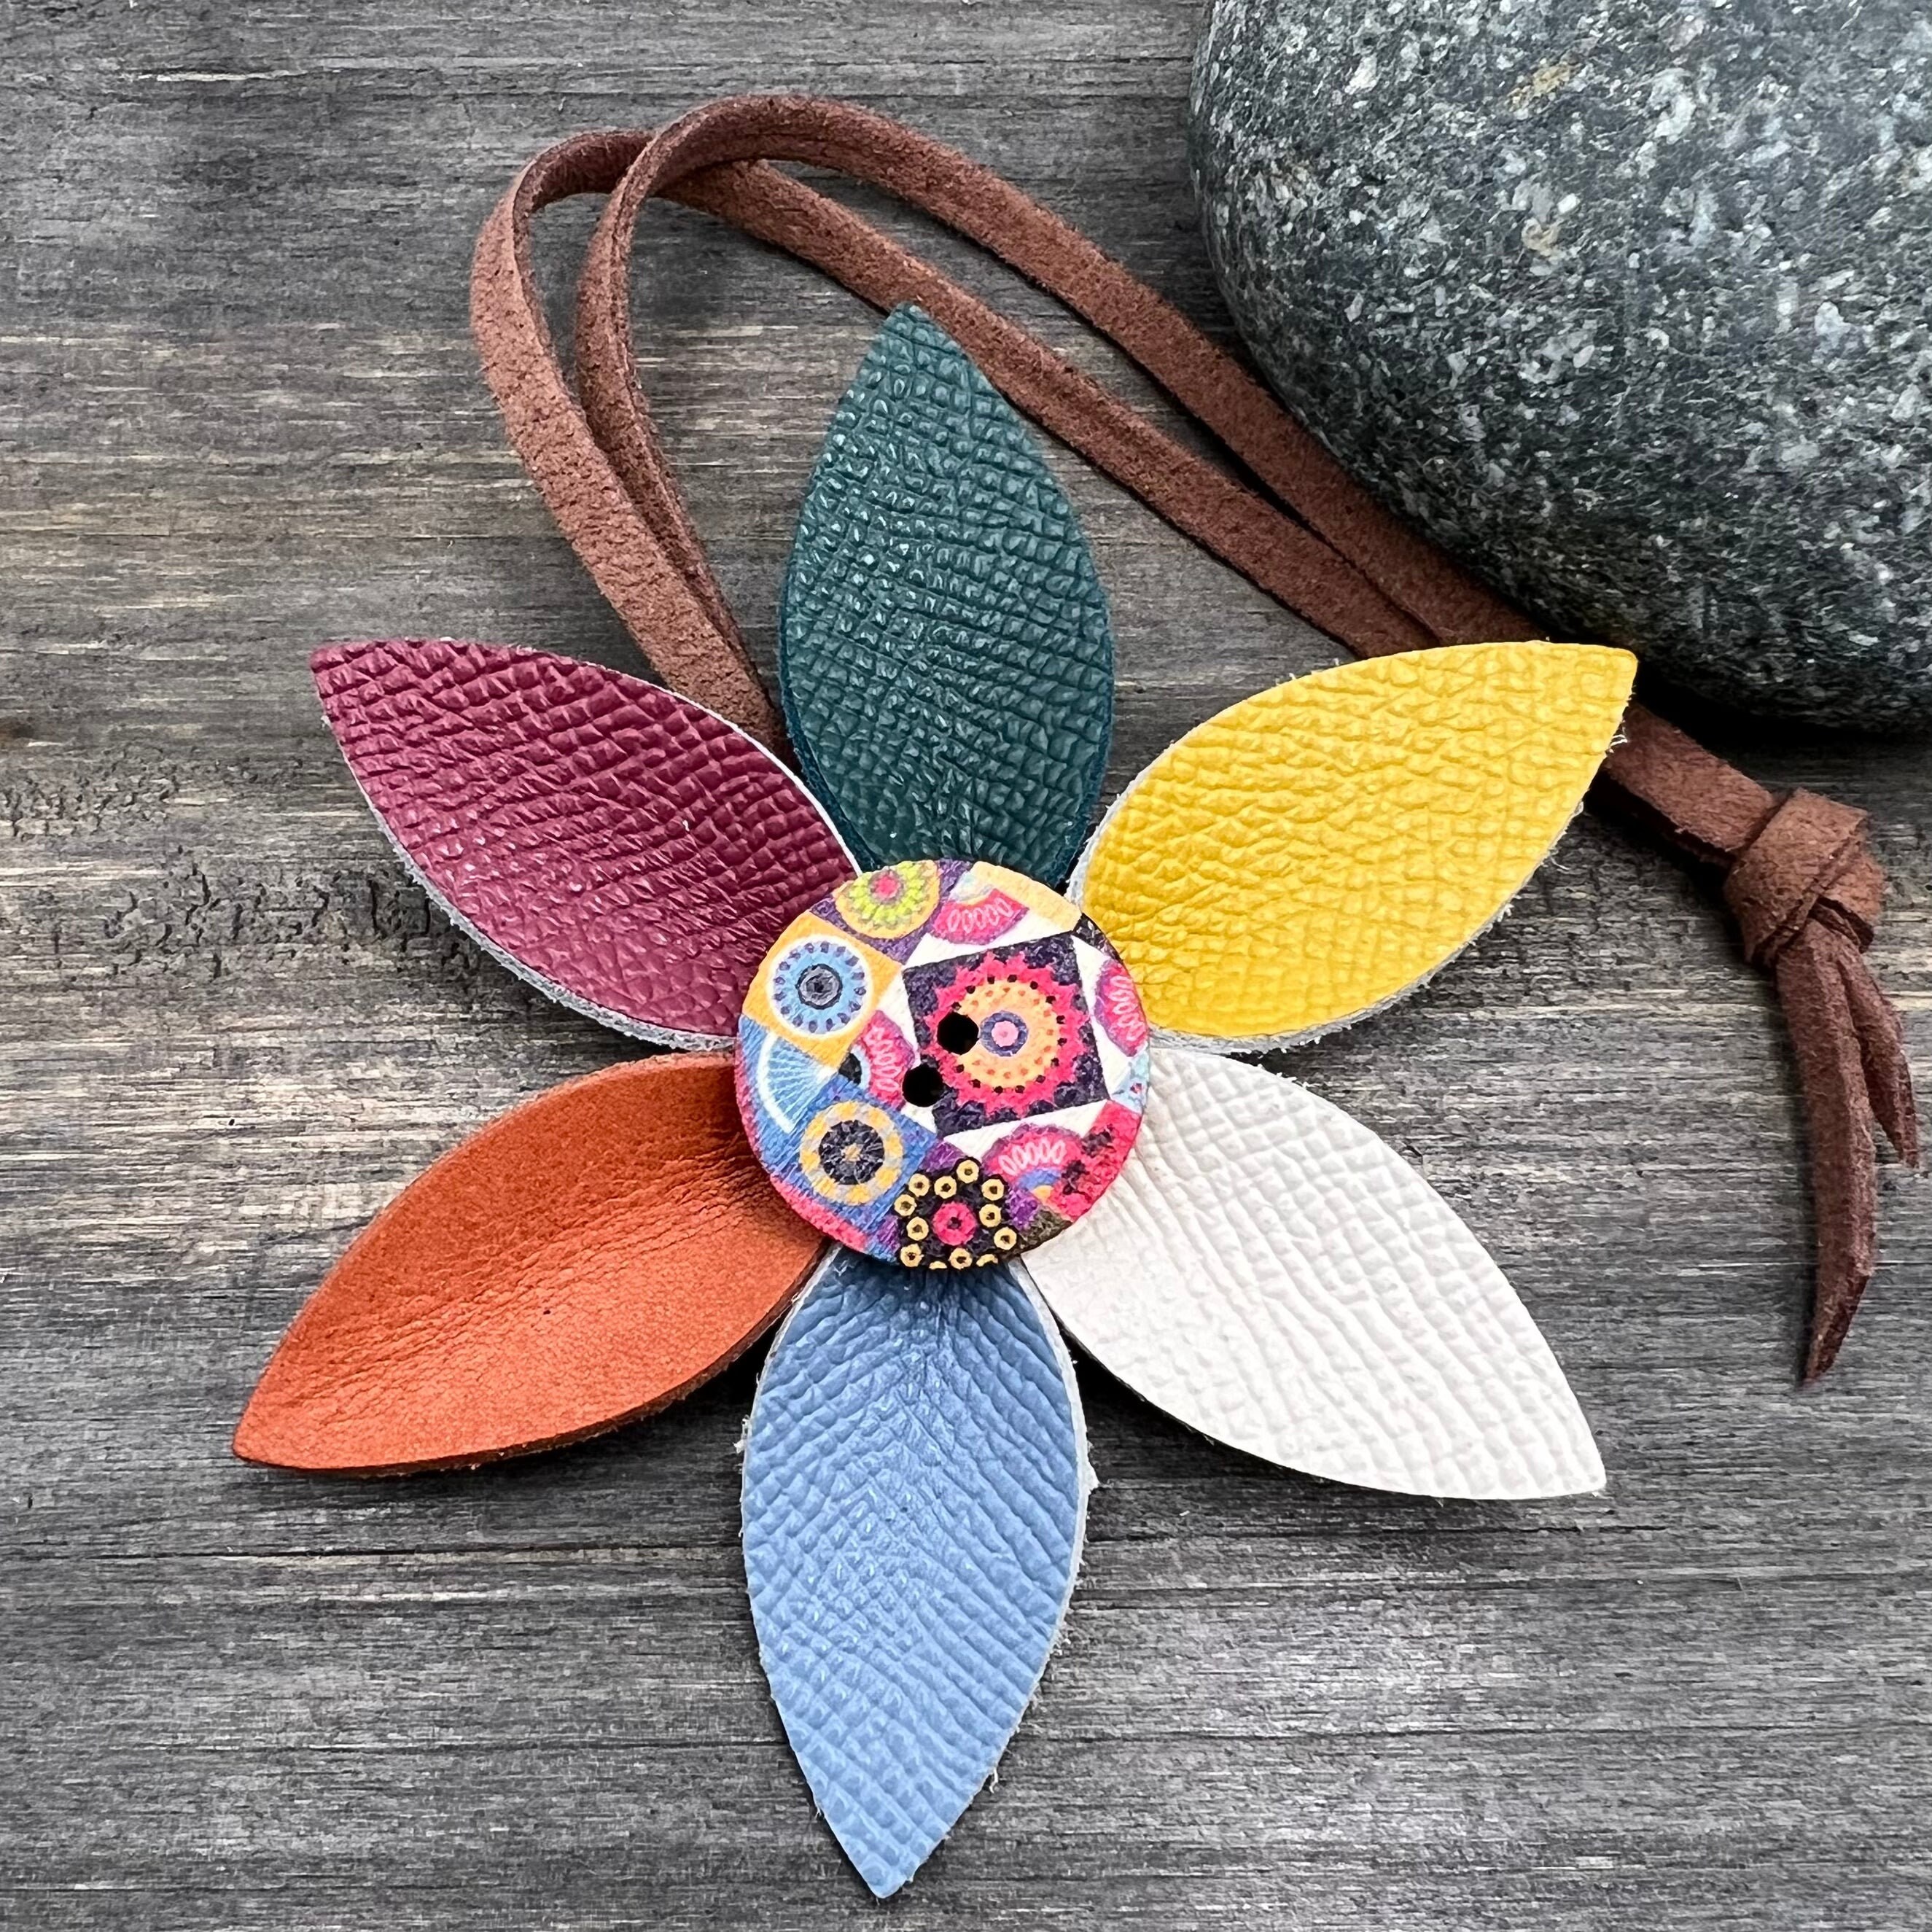 Leather Flower Bag Charm with Tote Loop